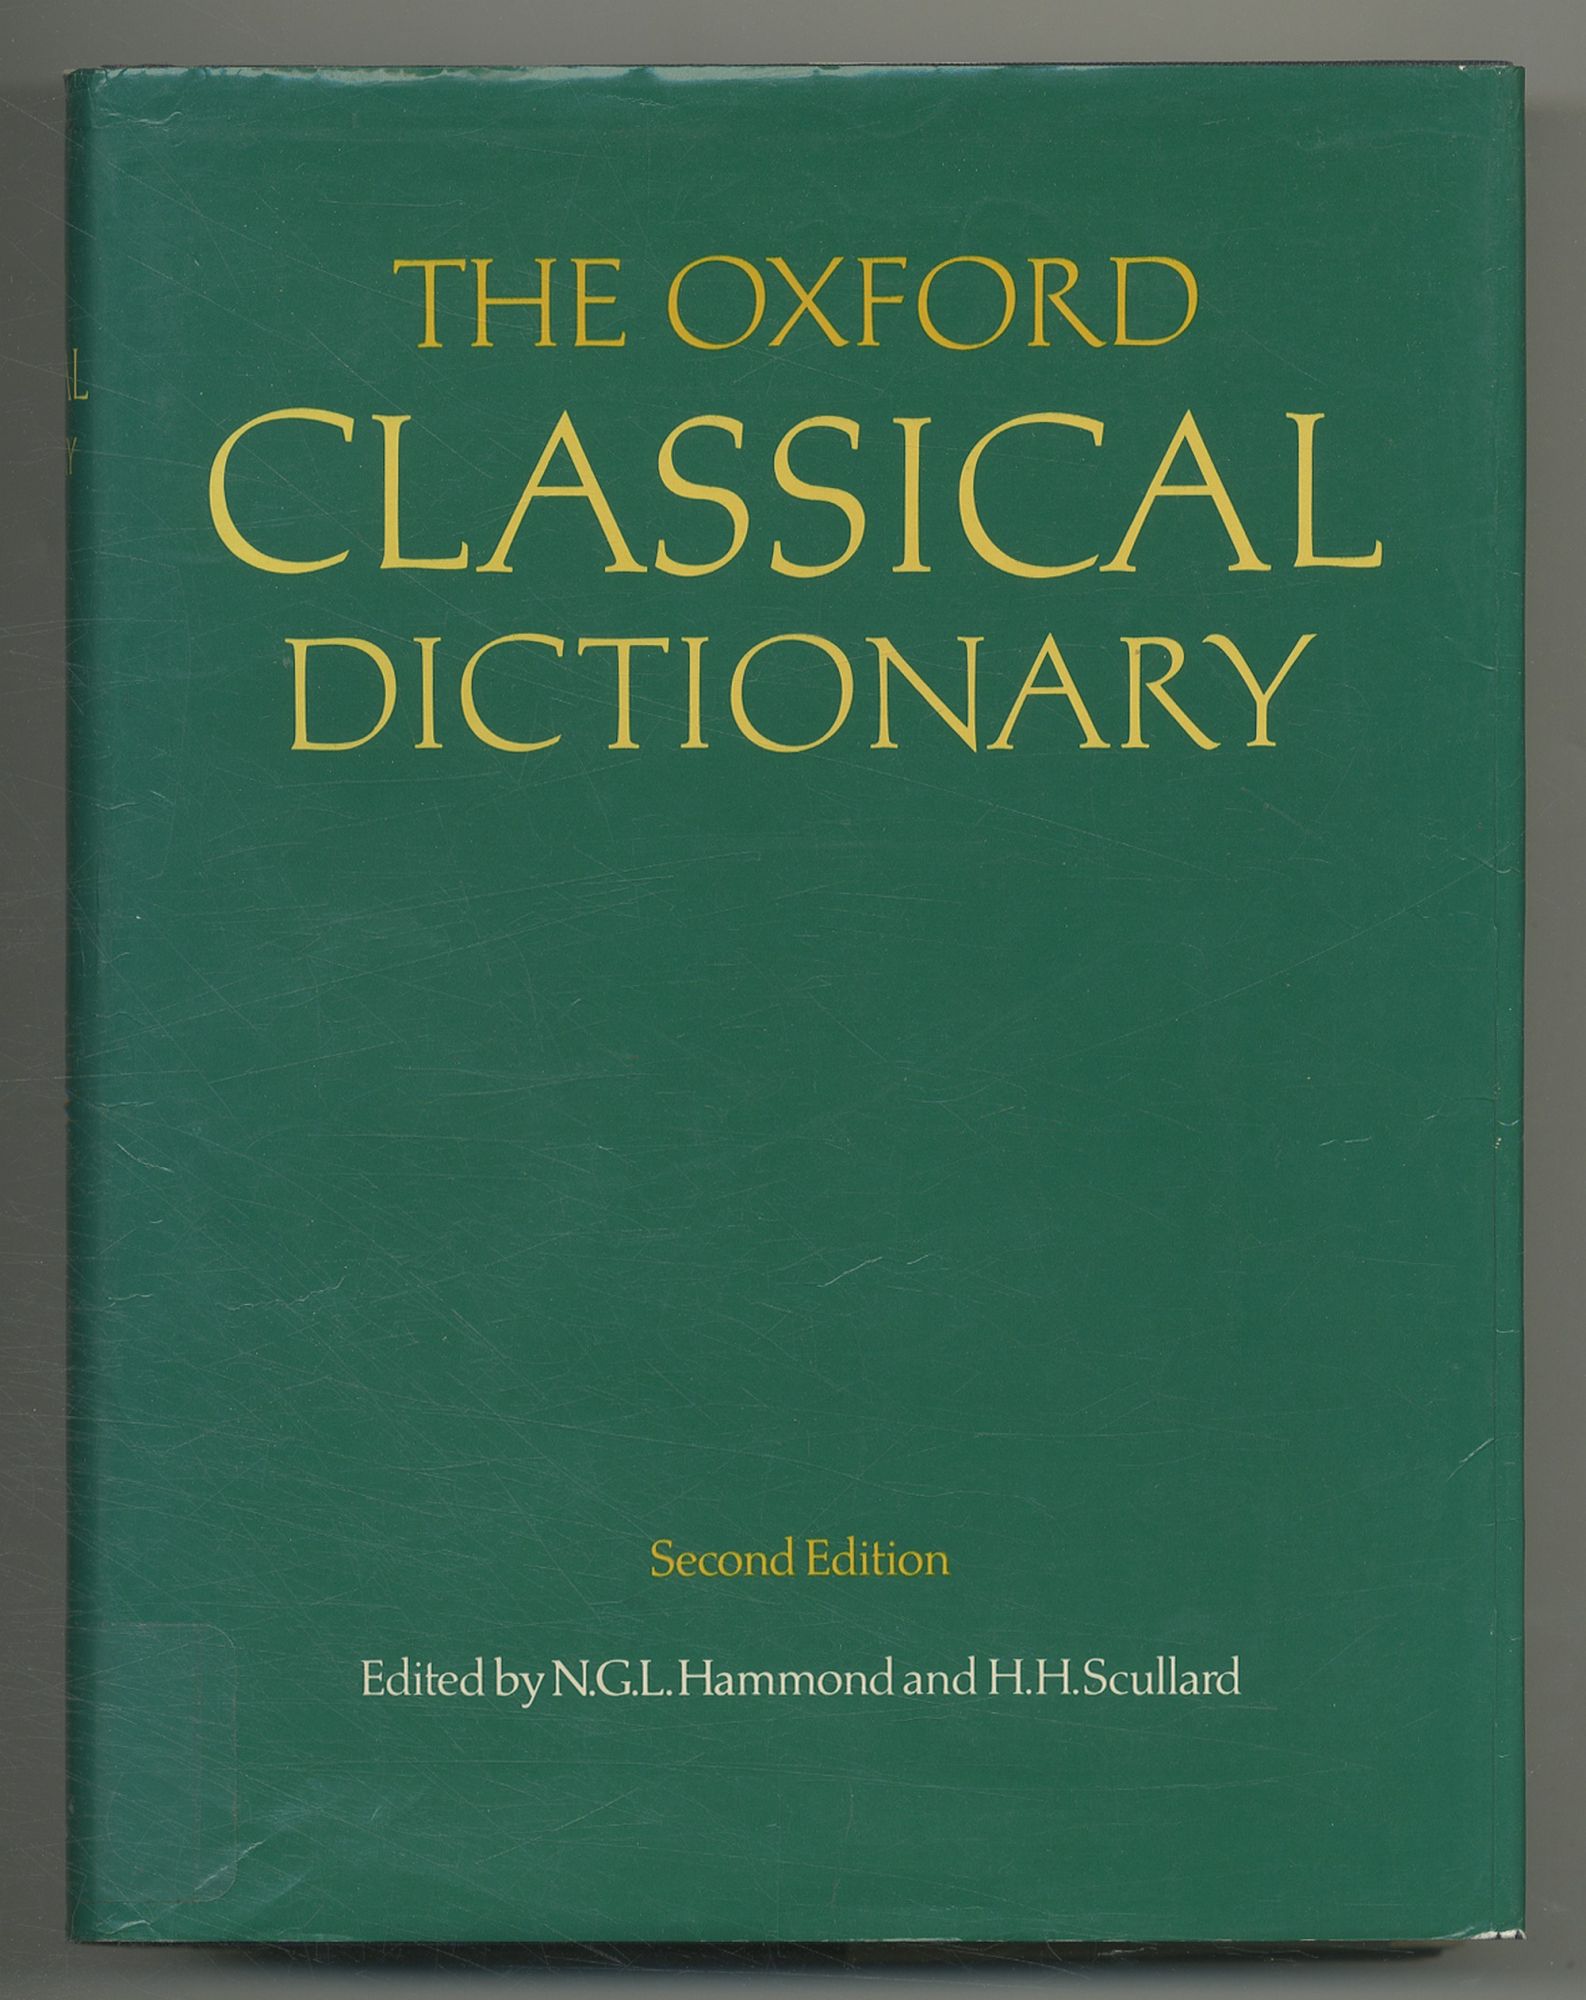 The Oxford Classical Dictionary: Second Edition - HAMMOND, N.G.L. and H.H. Scullard, edited by